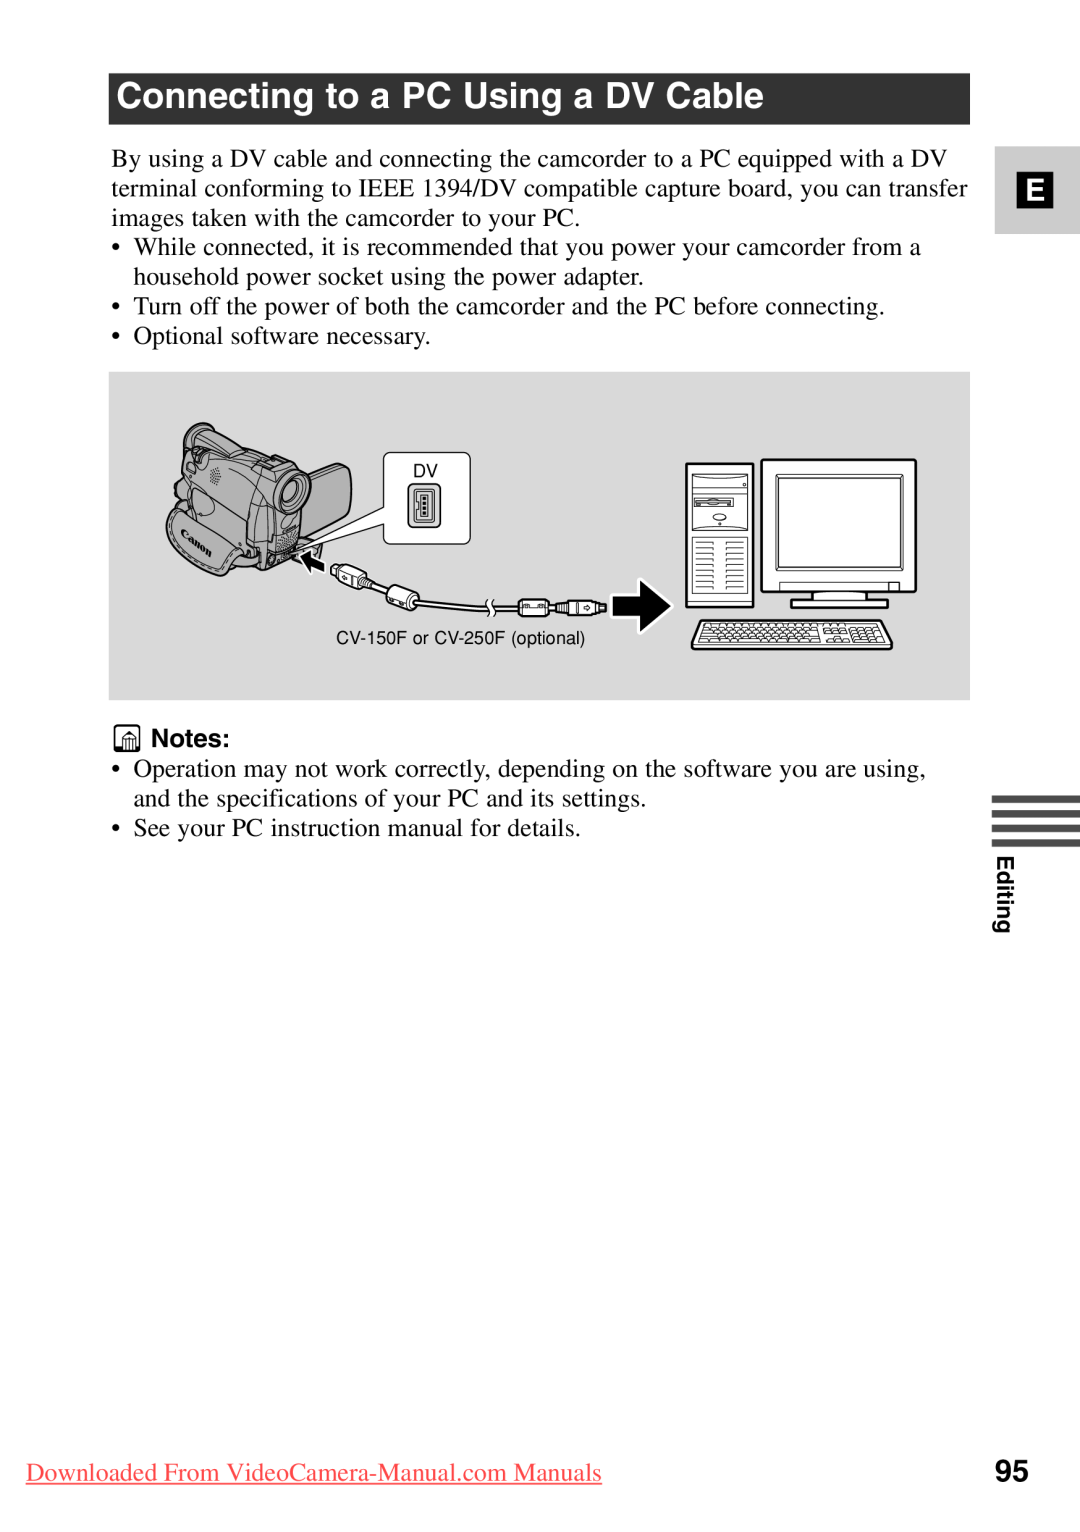 Canon 7561A001, MV500i Connecting to a PC Using a DV Cable, Downloaded From VideoCamera-Manual.com Manuals 